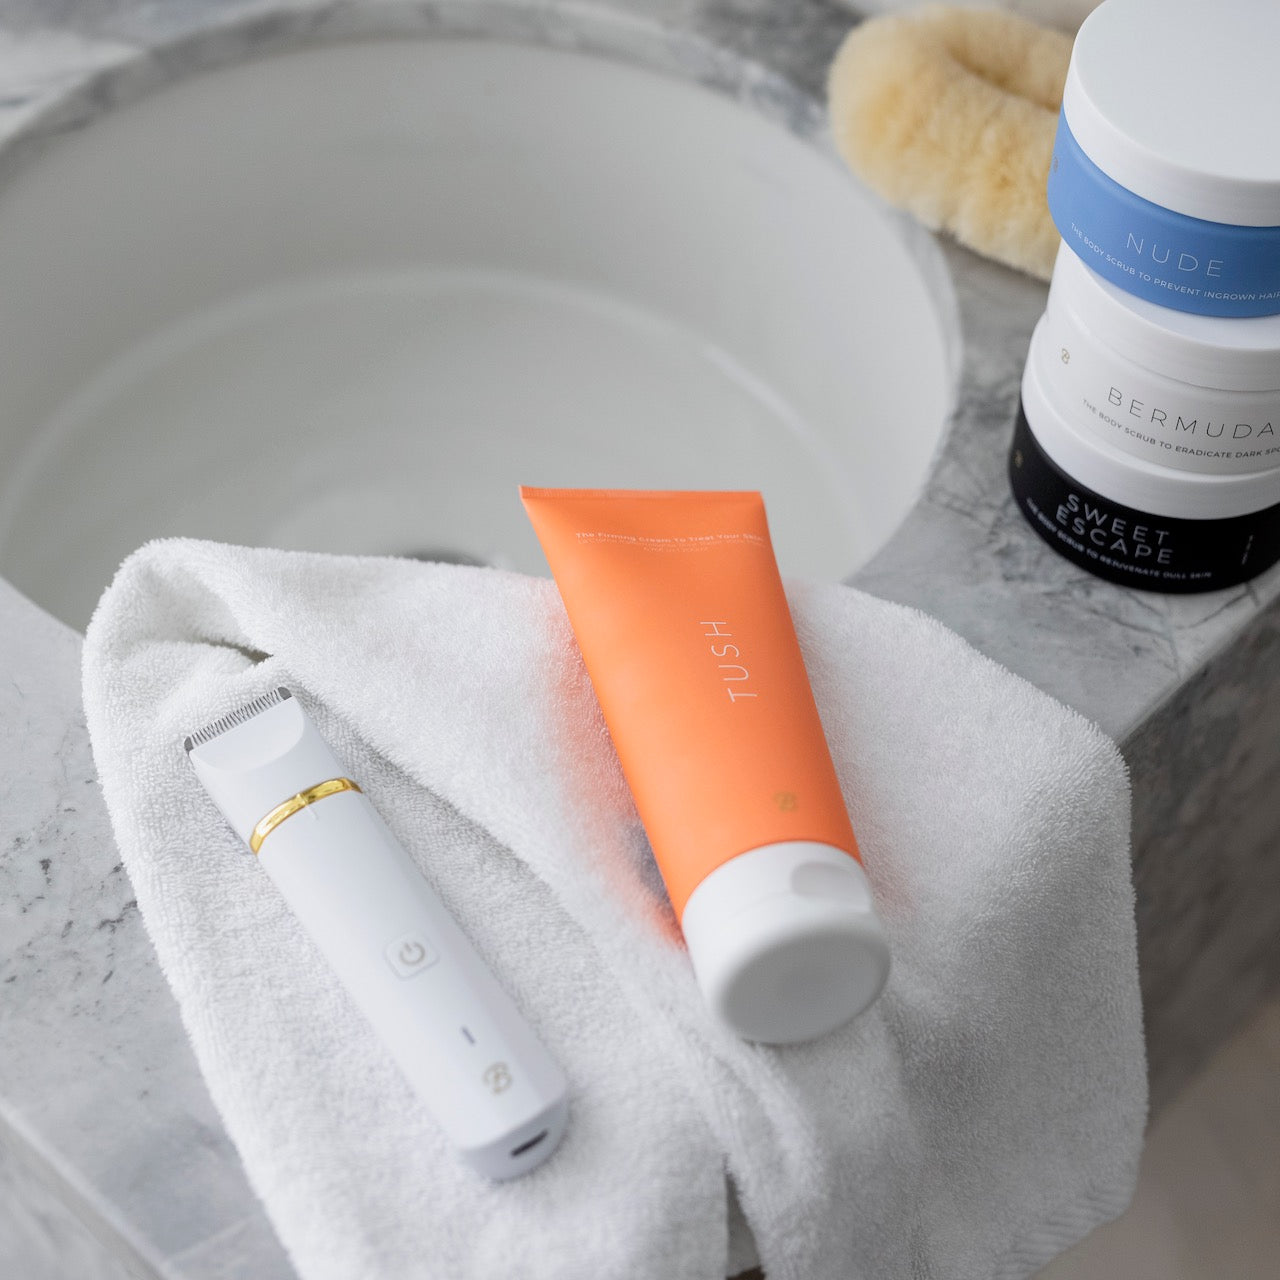 Tube of Tush cream and a trimmer by Bushbalm backdropped by a bathroom counter.